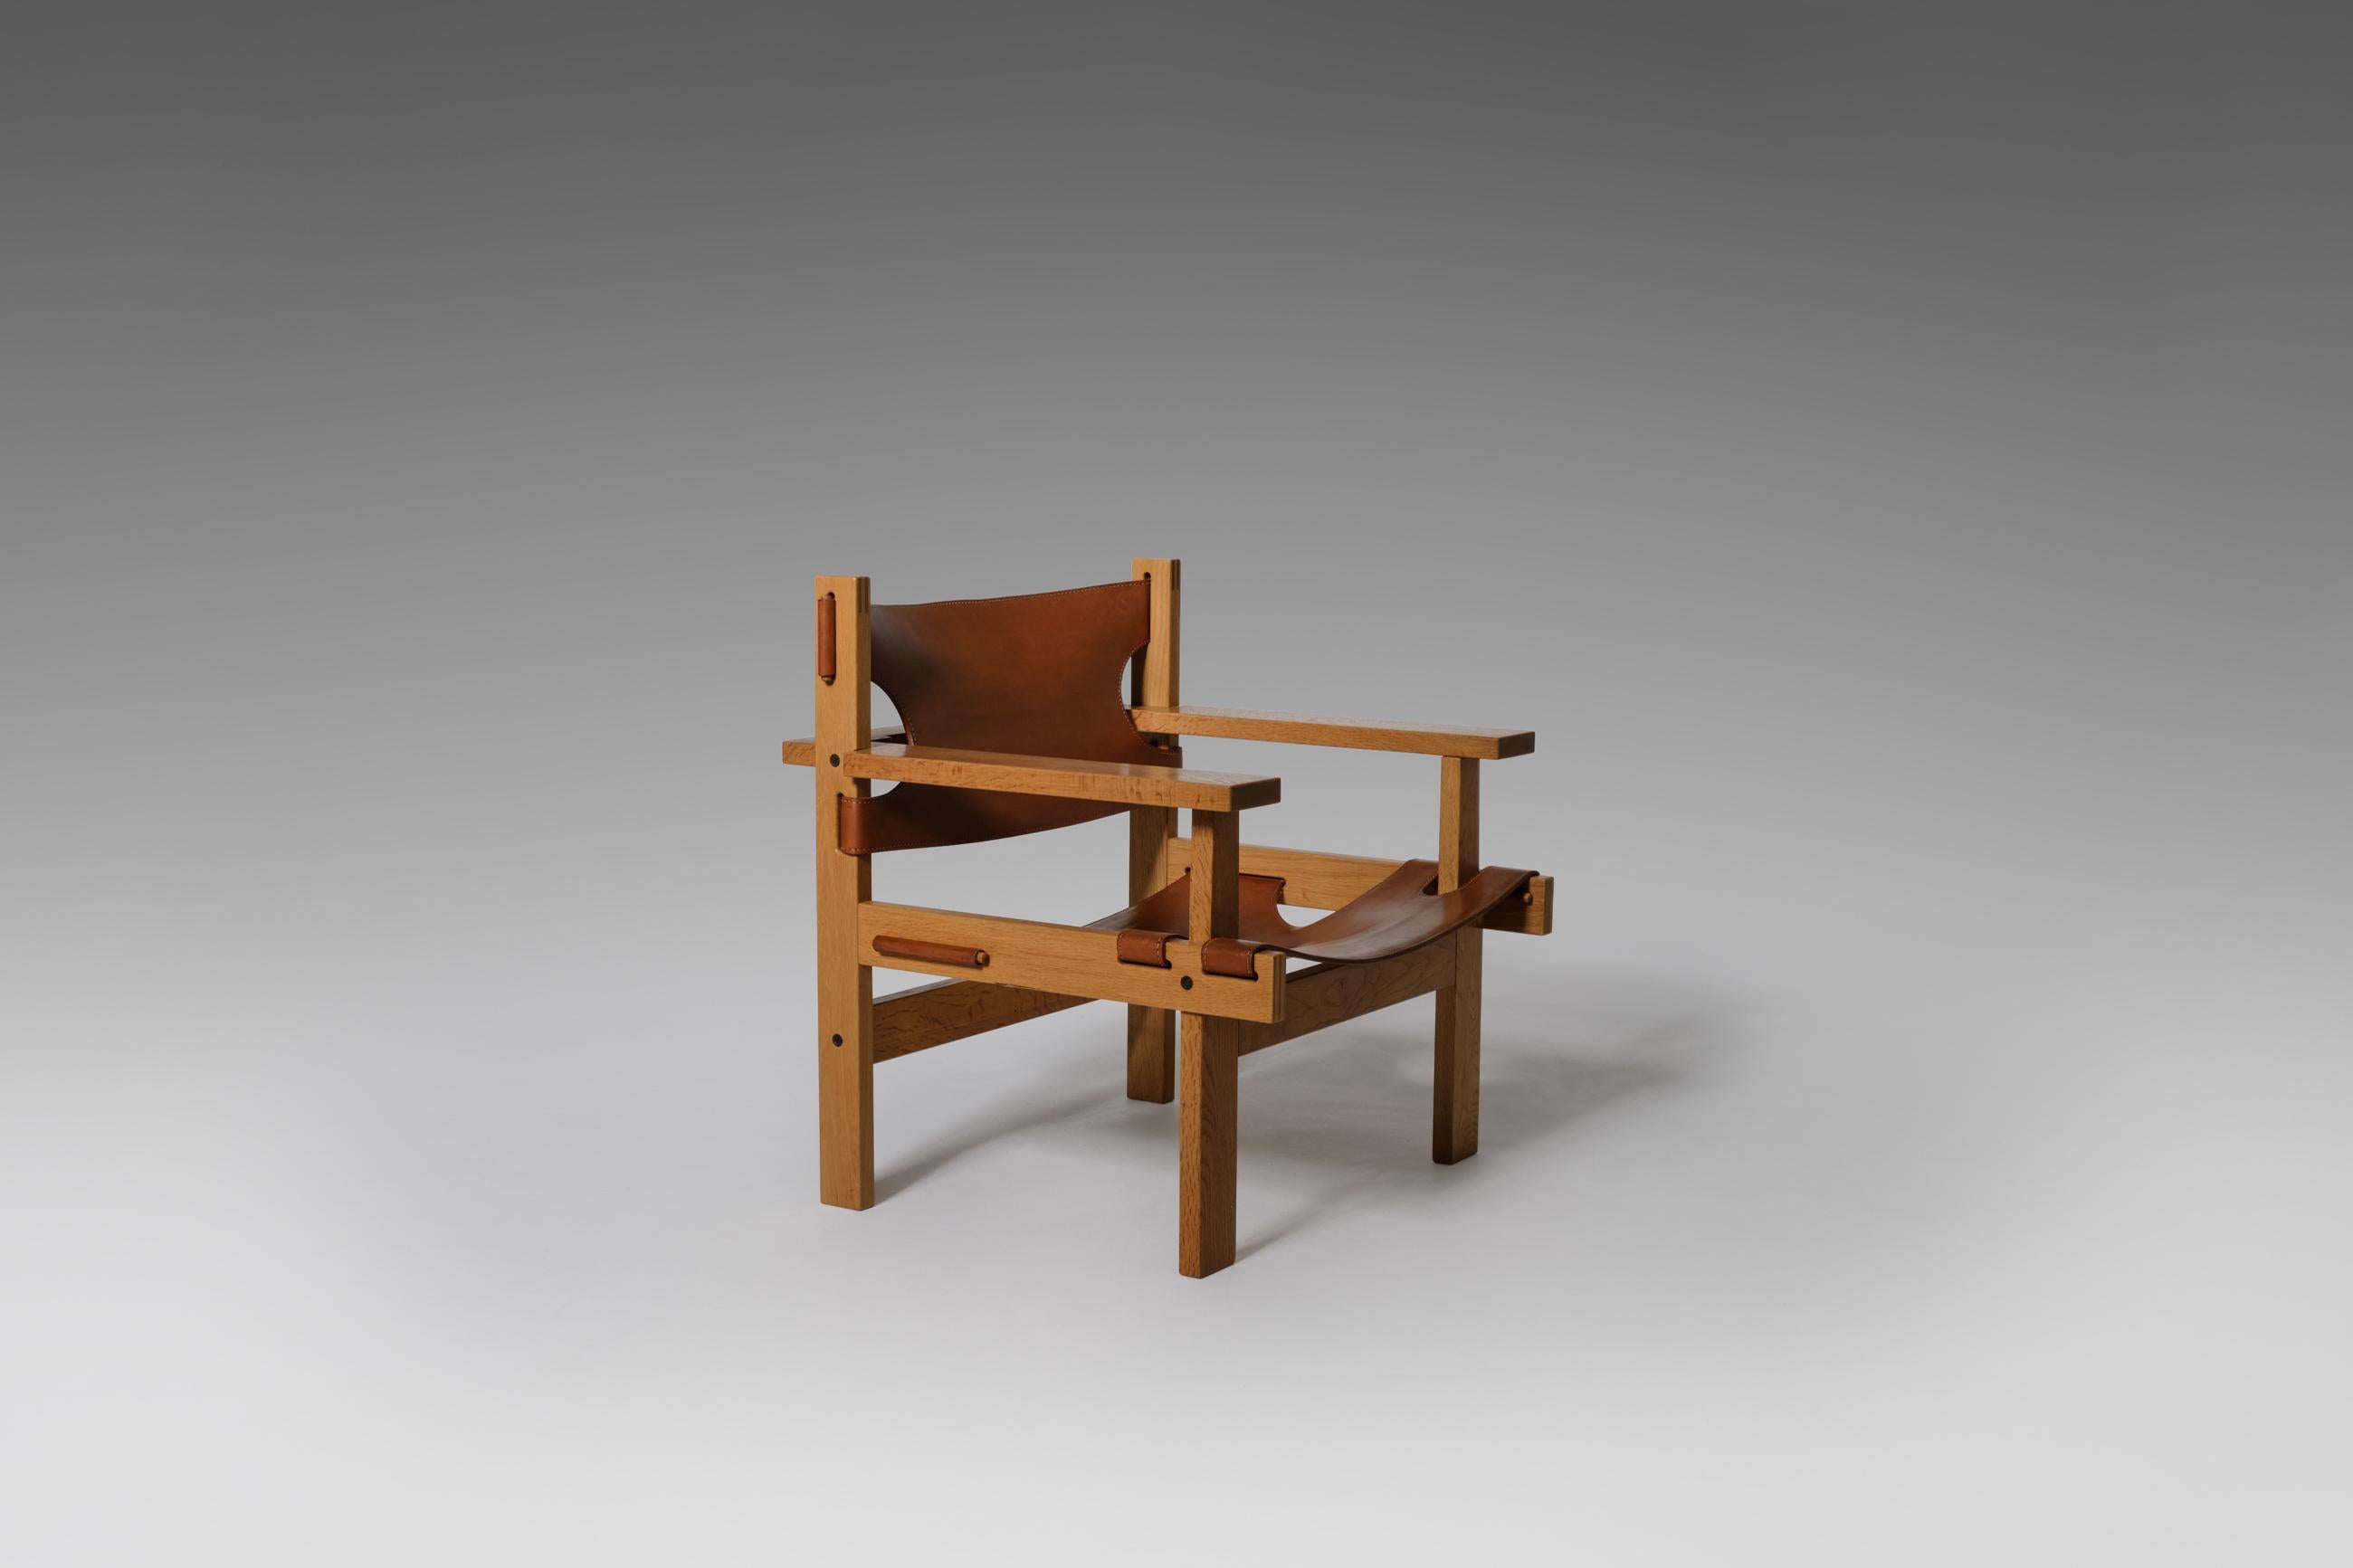 Rare ‘Höfðingjinginn’ or ‘Chief’ armchair by Gunnar H. Gudmondsson, Iceland 1961. Hard to find item of which the first prototype was made in 1959-1960. The chair is made from a rectangular solid oak frame, thick natural saddle leather and refined